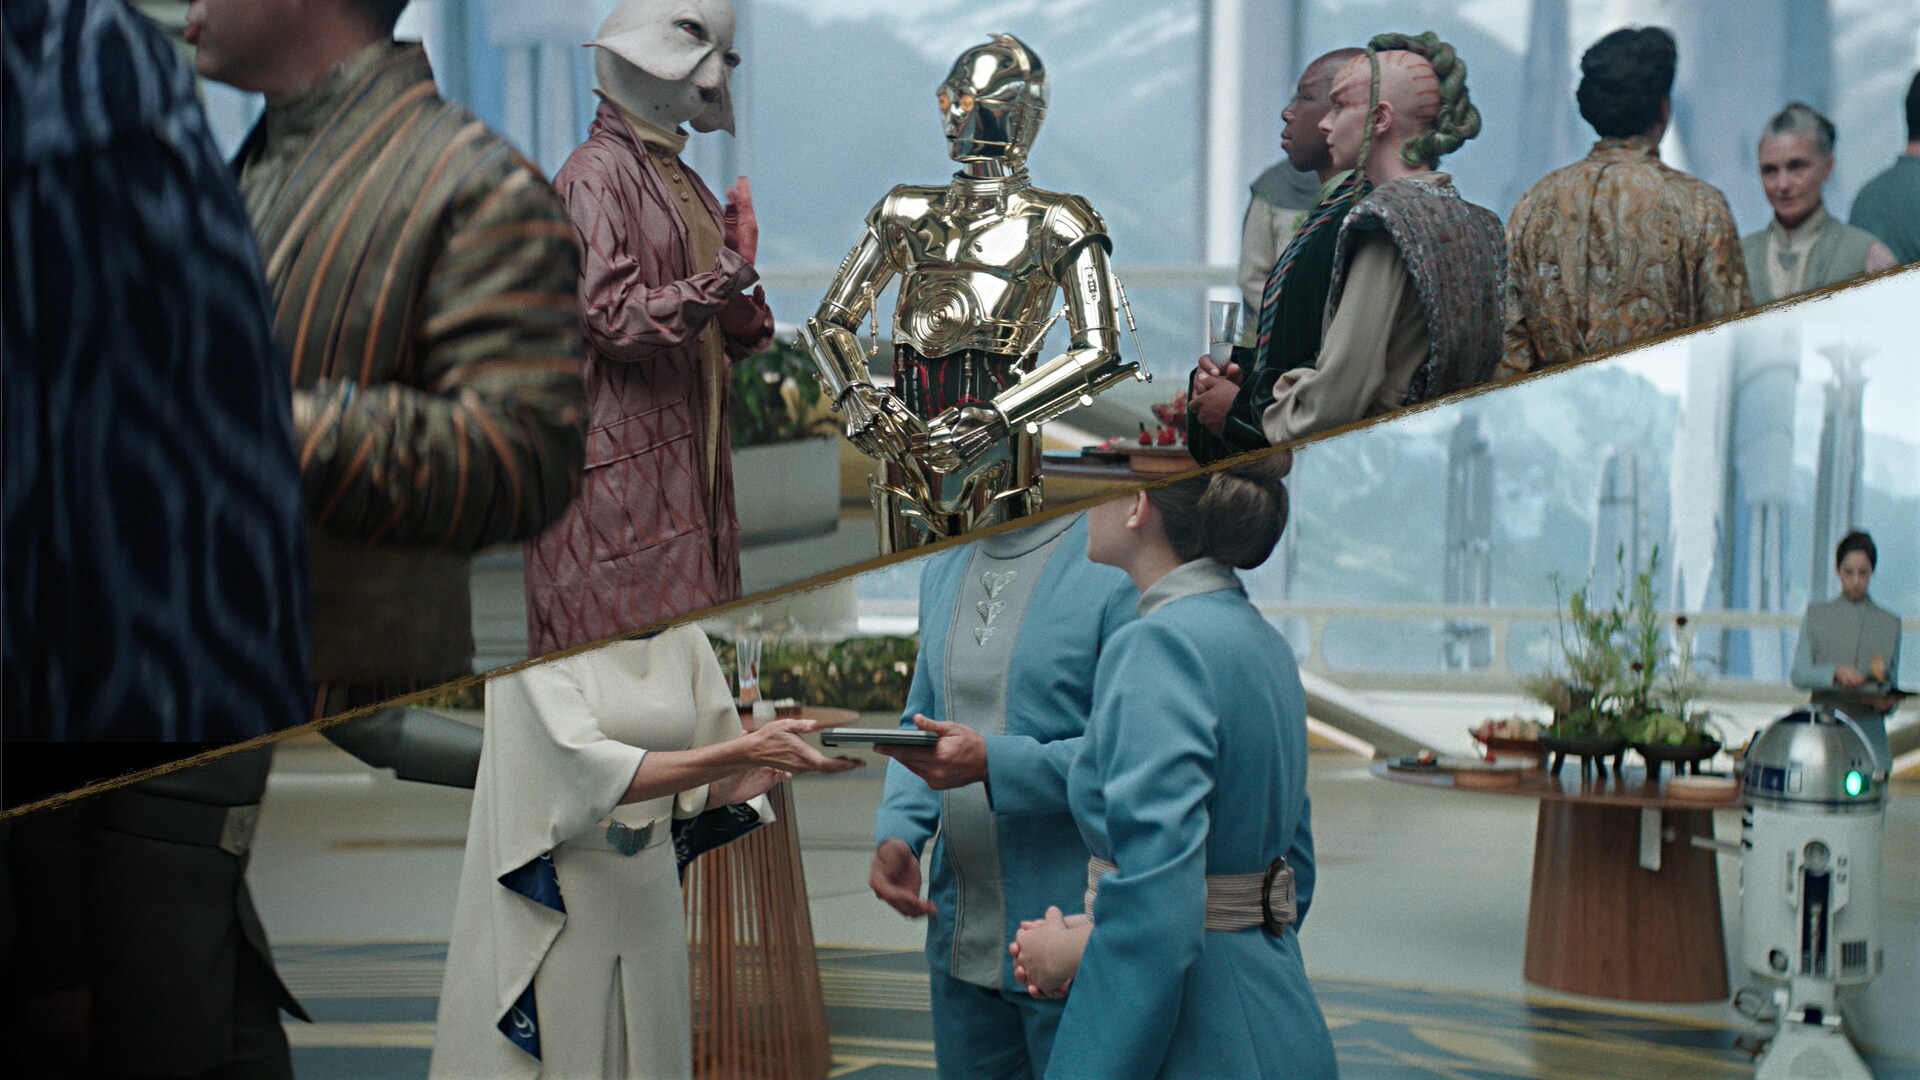 Star Wars' iconic droid duo, currently part of the House of Organa, make background appearances i...